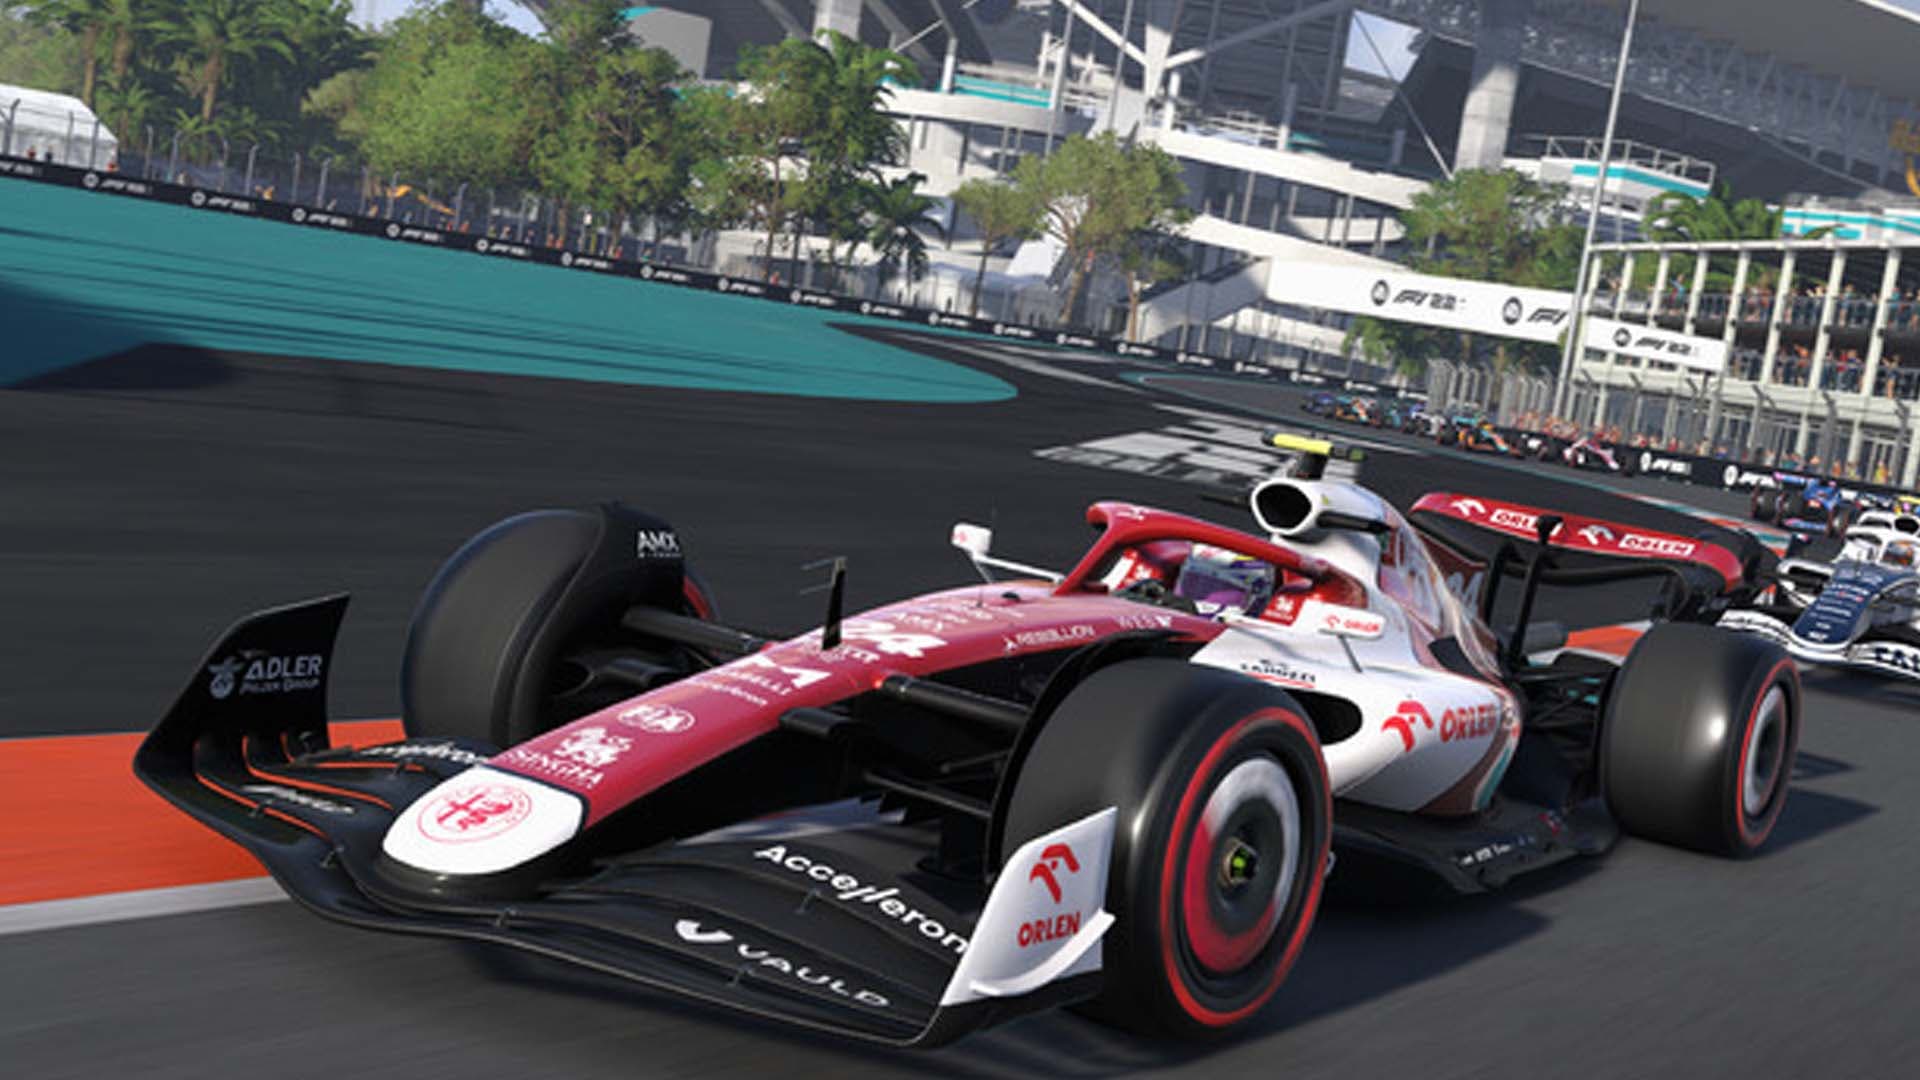 Cars on track in Miami in F1 2022